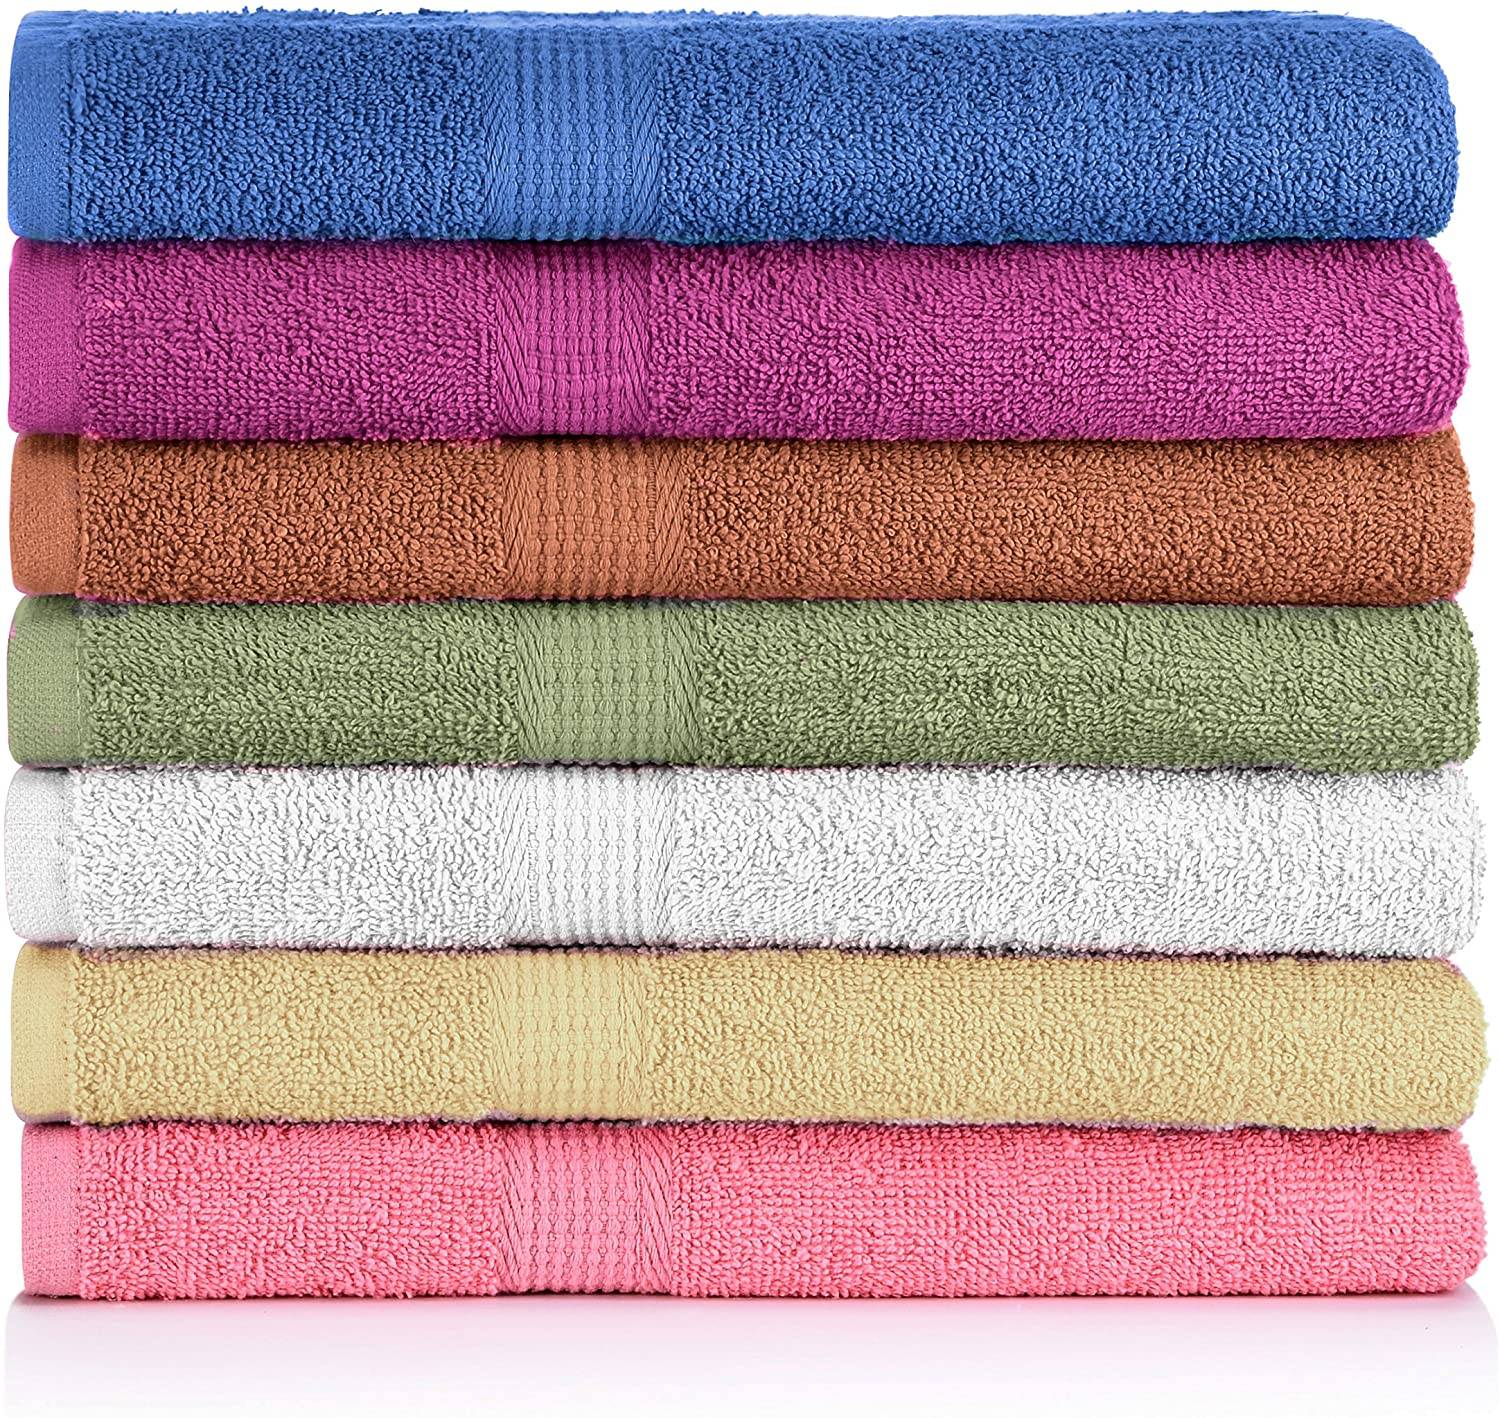 Best quality Terry Pure Color - Towels/beach towel/ Bath Towels ,Extra-Absorbent – 100% Cotton – 27×54” Towels, Soft and Quick Dry Swim Terry towels with bright colors   – S...